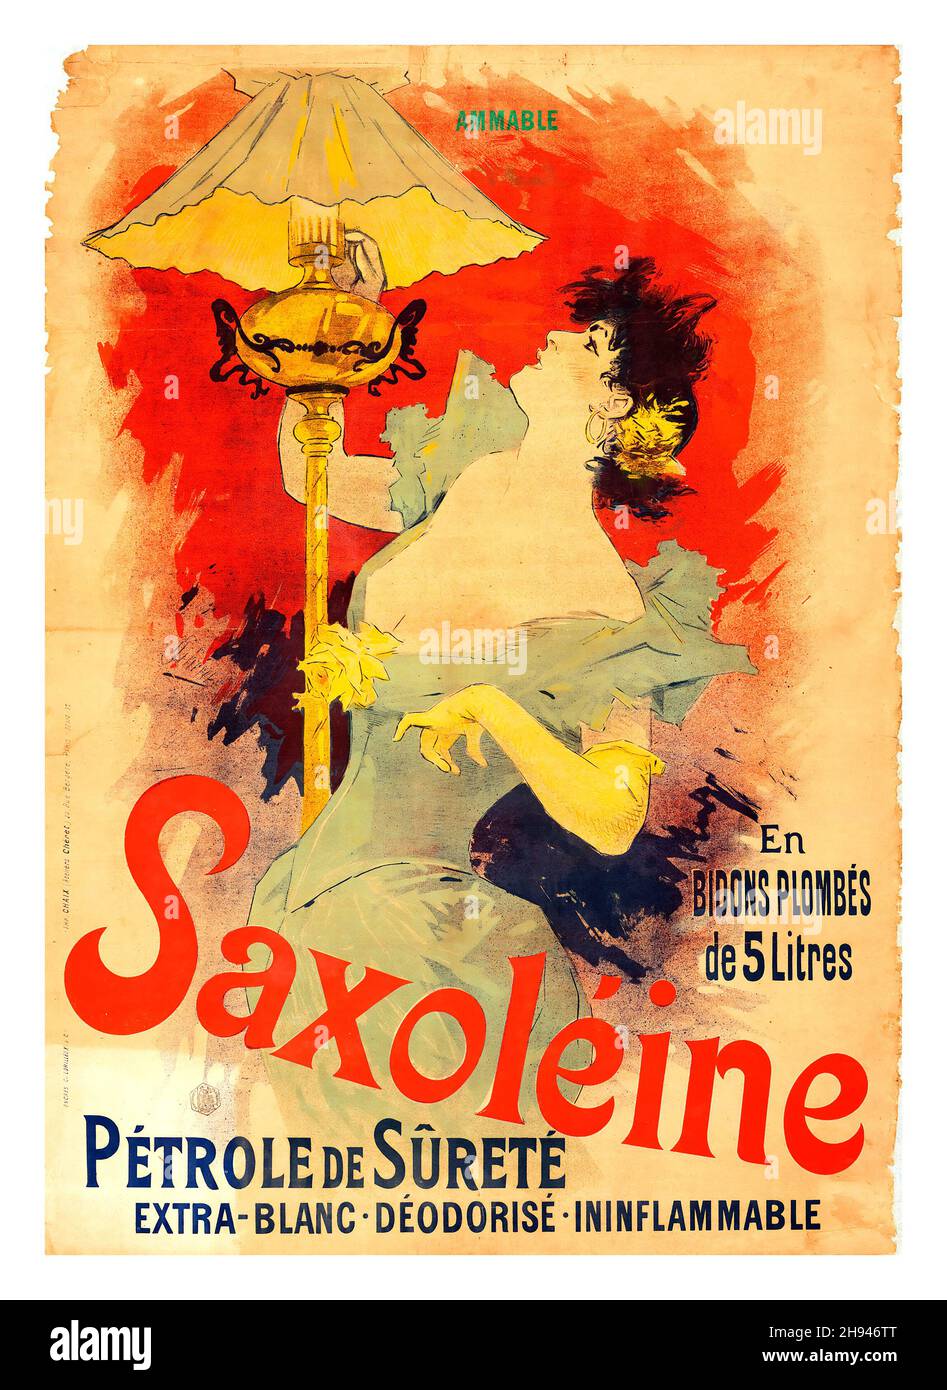 Saxoleine (c. 1899). Poster art by Jules Chéret (1836-1932). French Advertising. Stock Photo